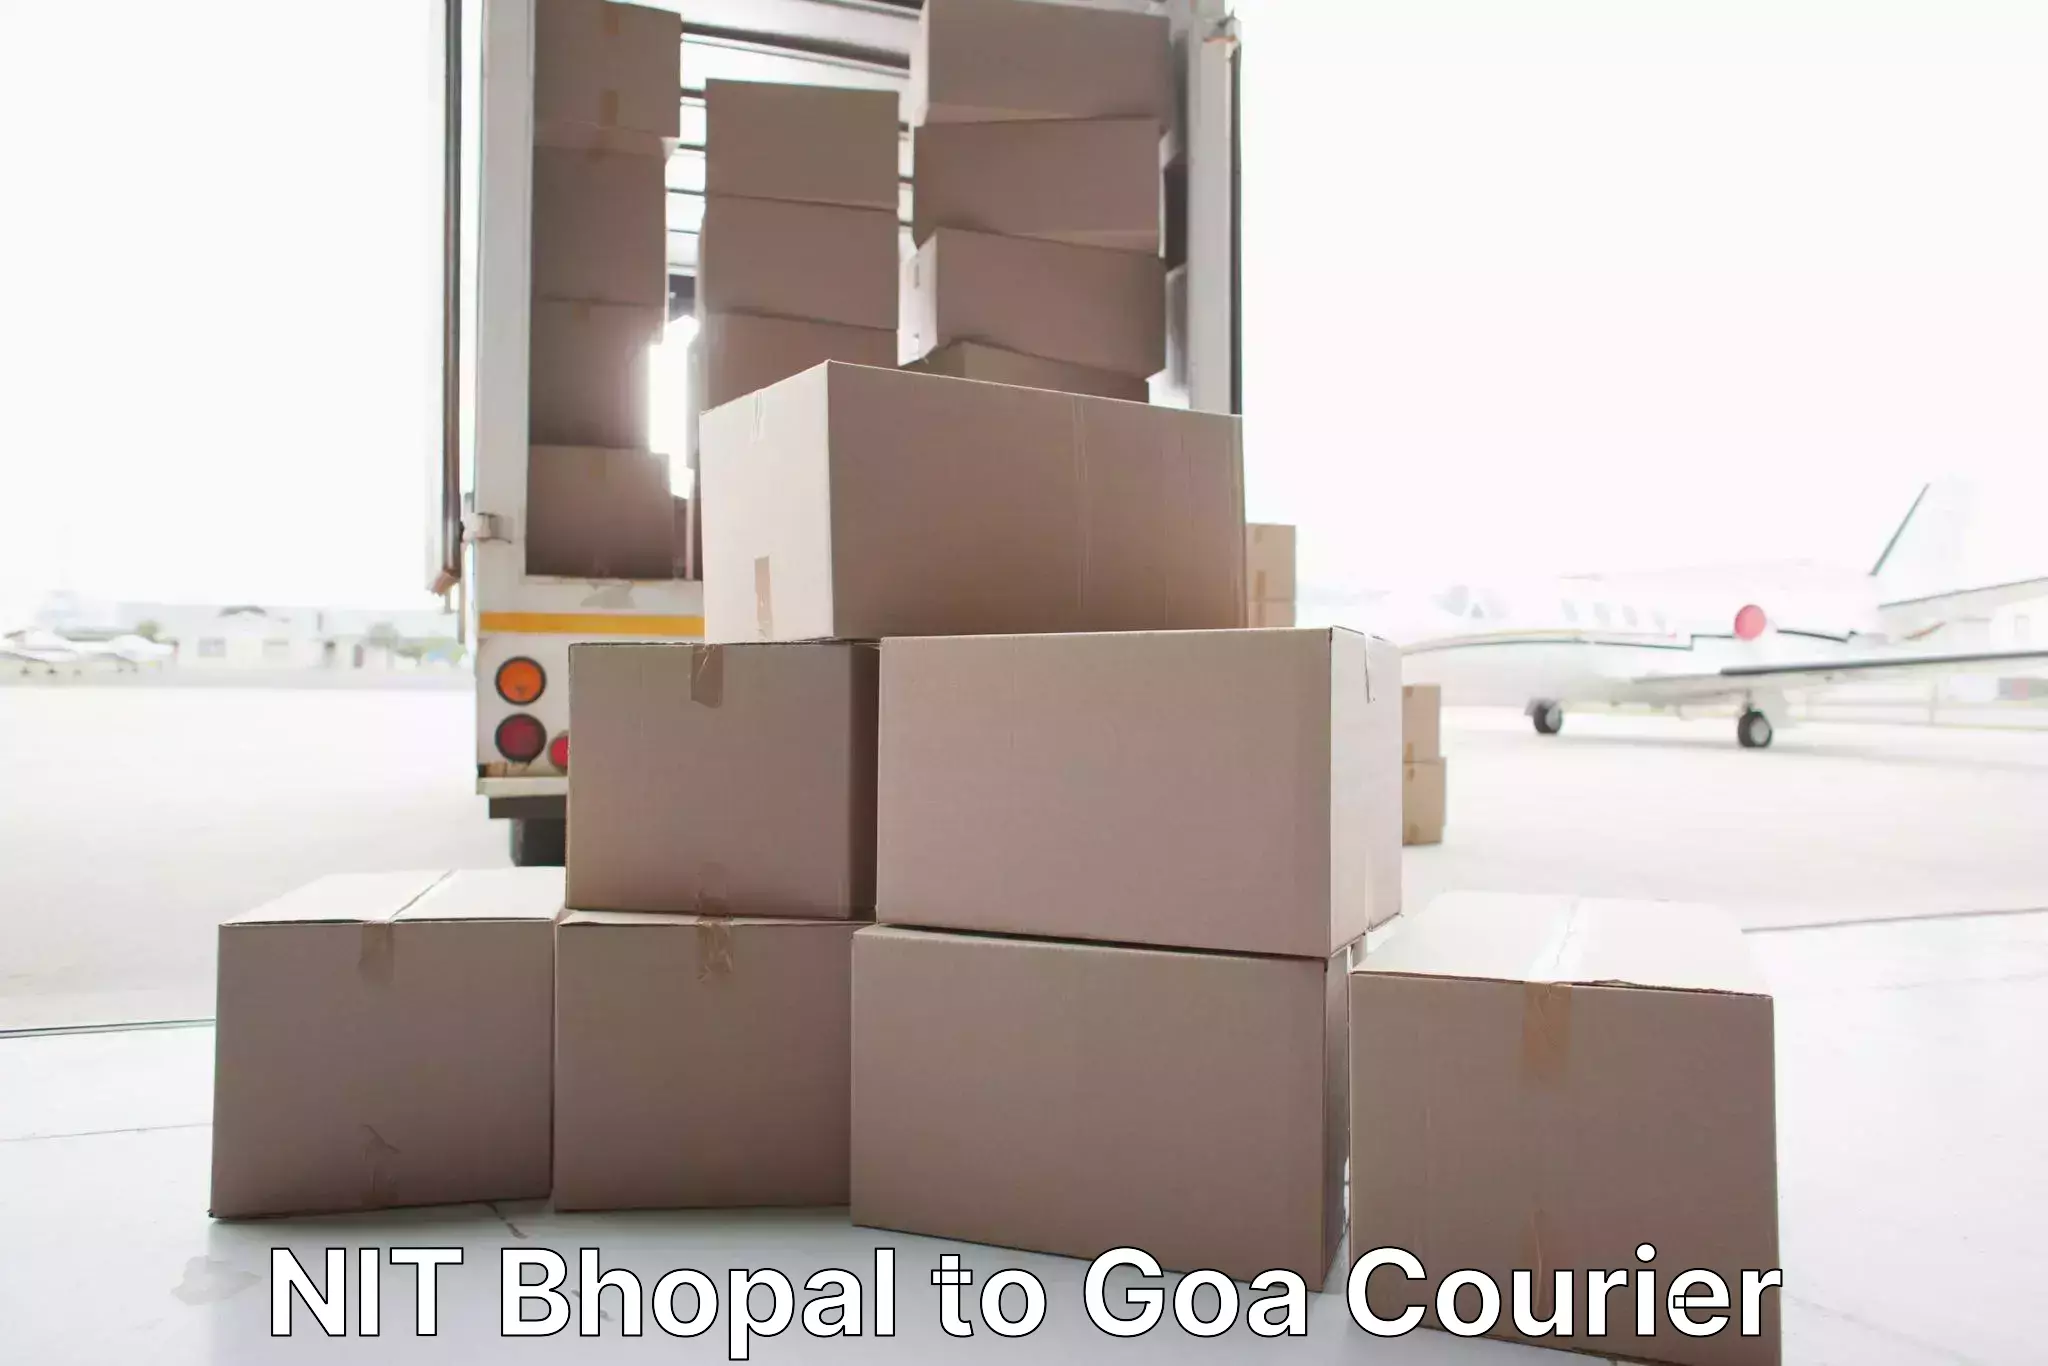 Comprehensive relocation services NIT Bhopal to Panaji